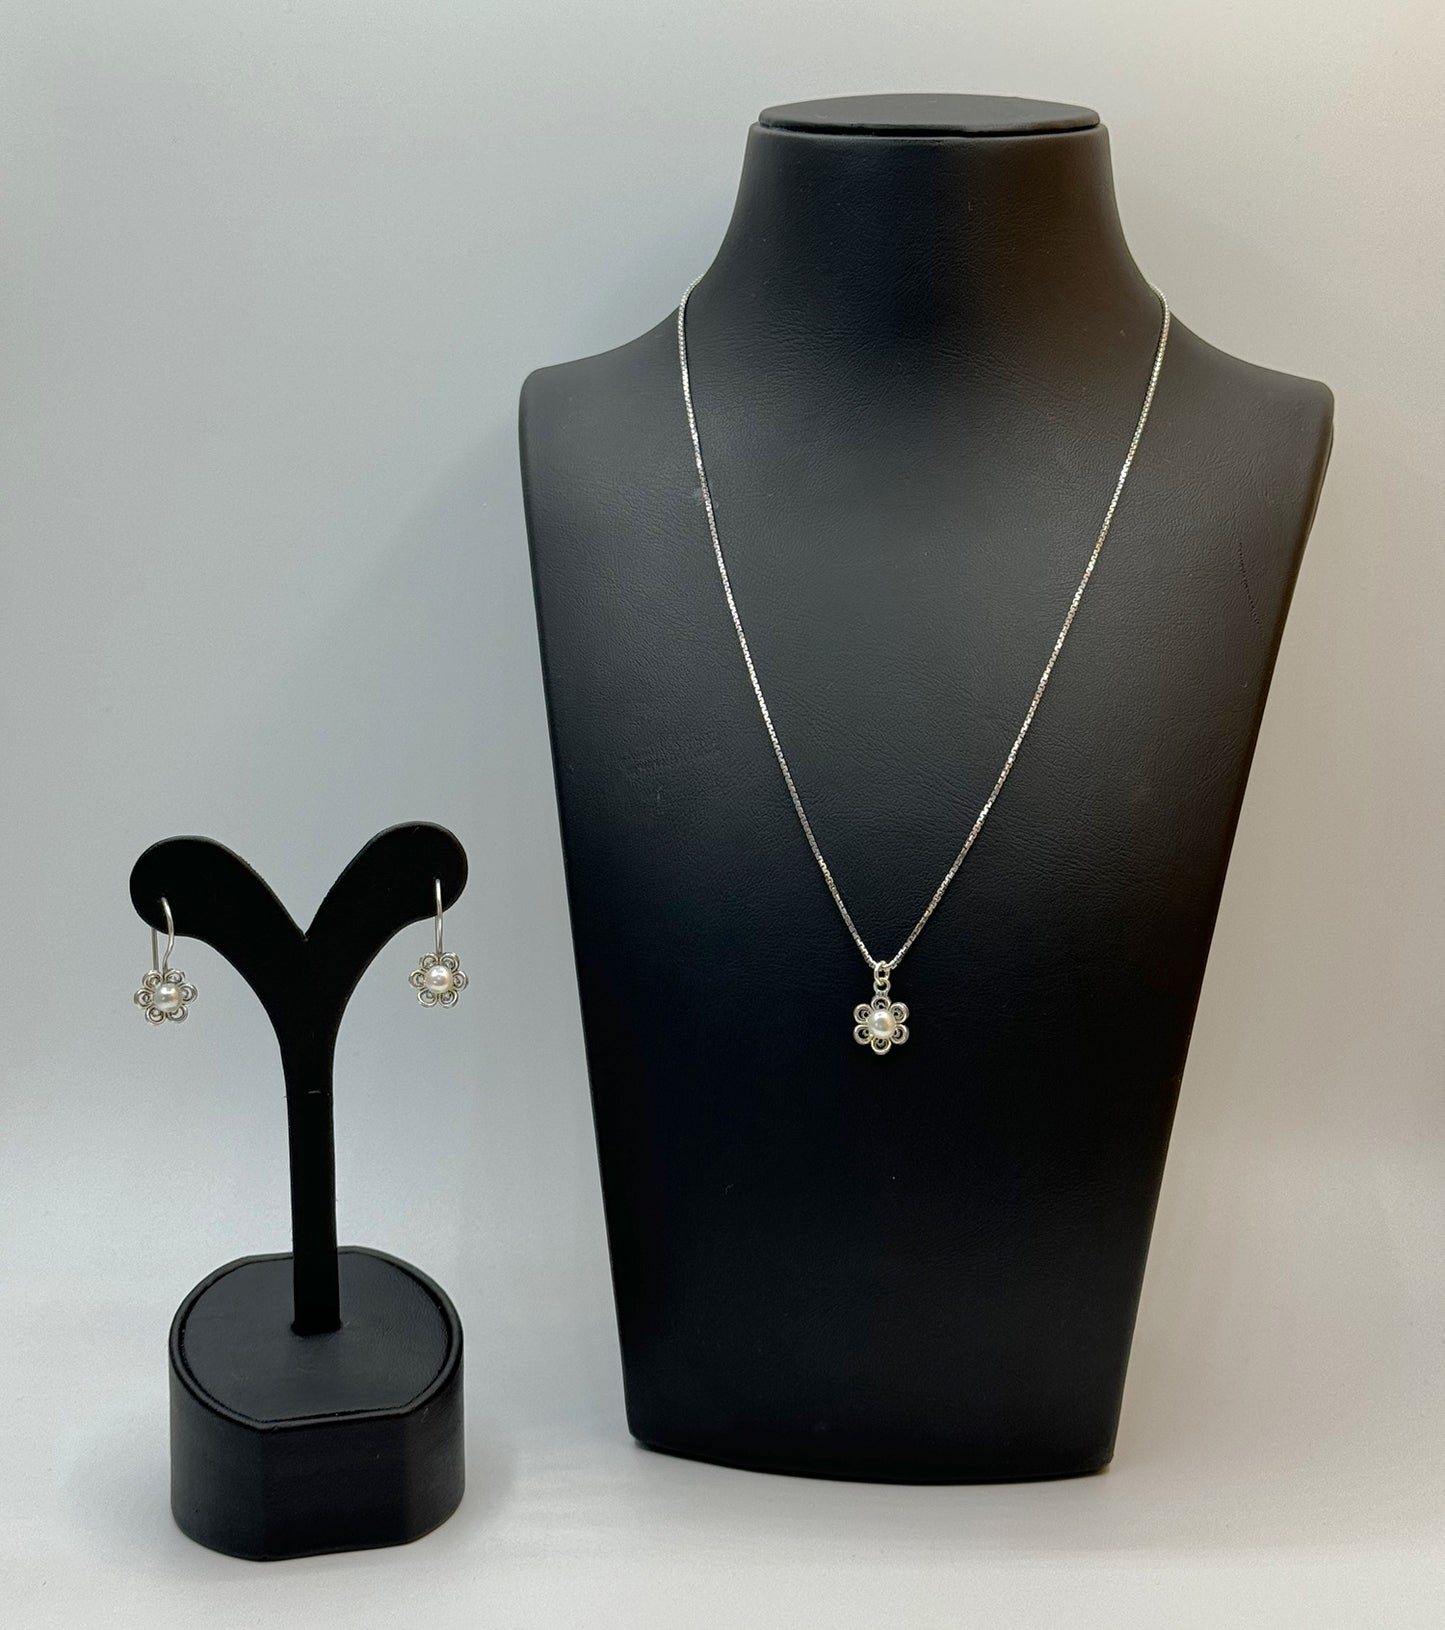 Flower Pearl Necklace and Stud Earrings Sterling Silver Set.  Jewelry set for her